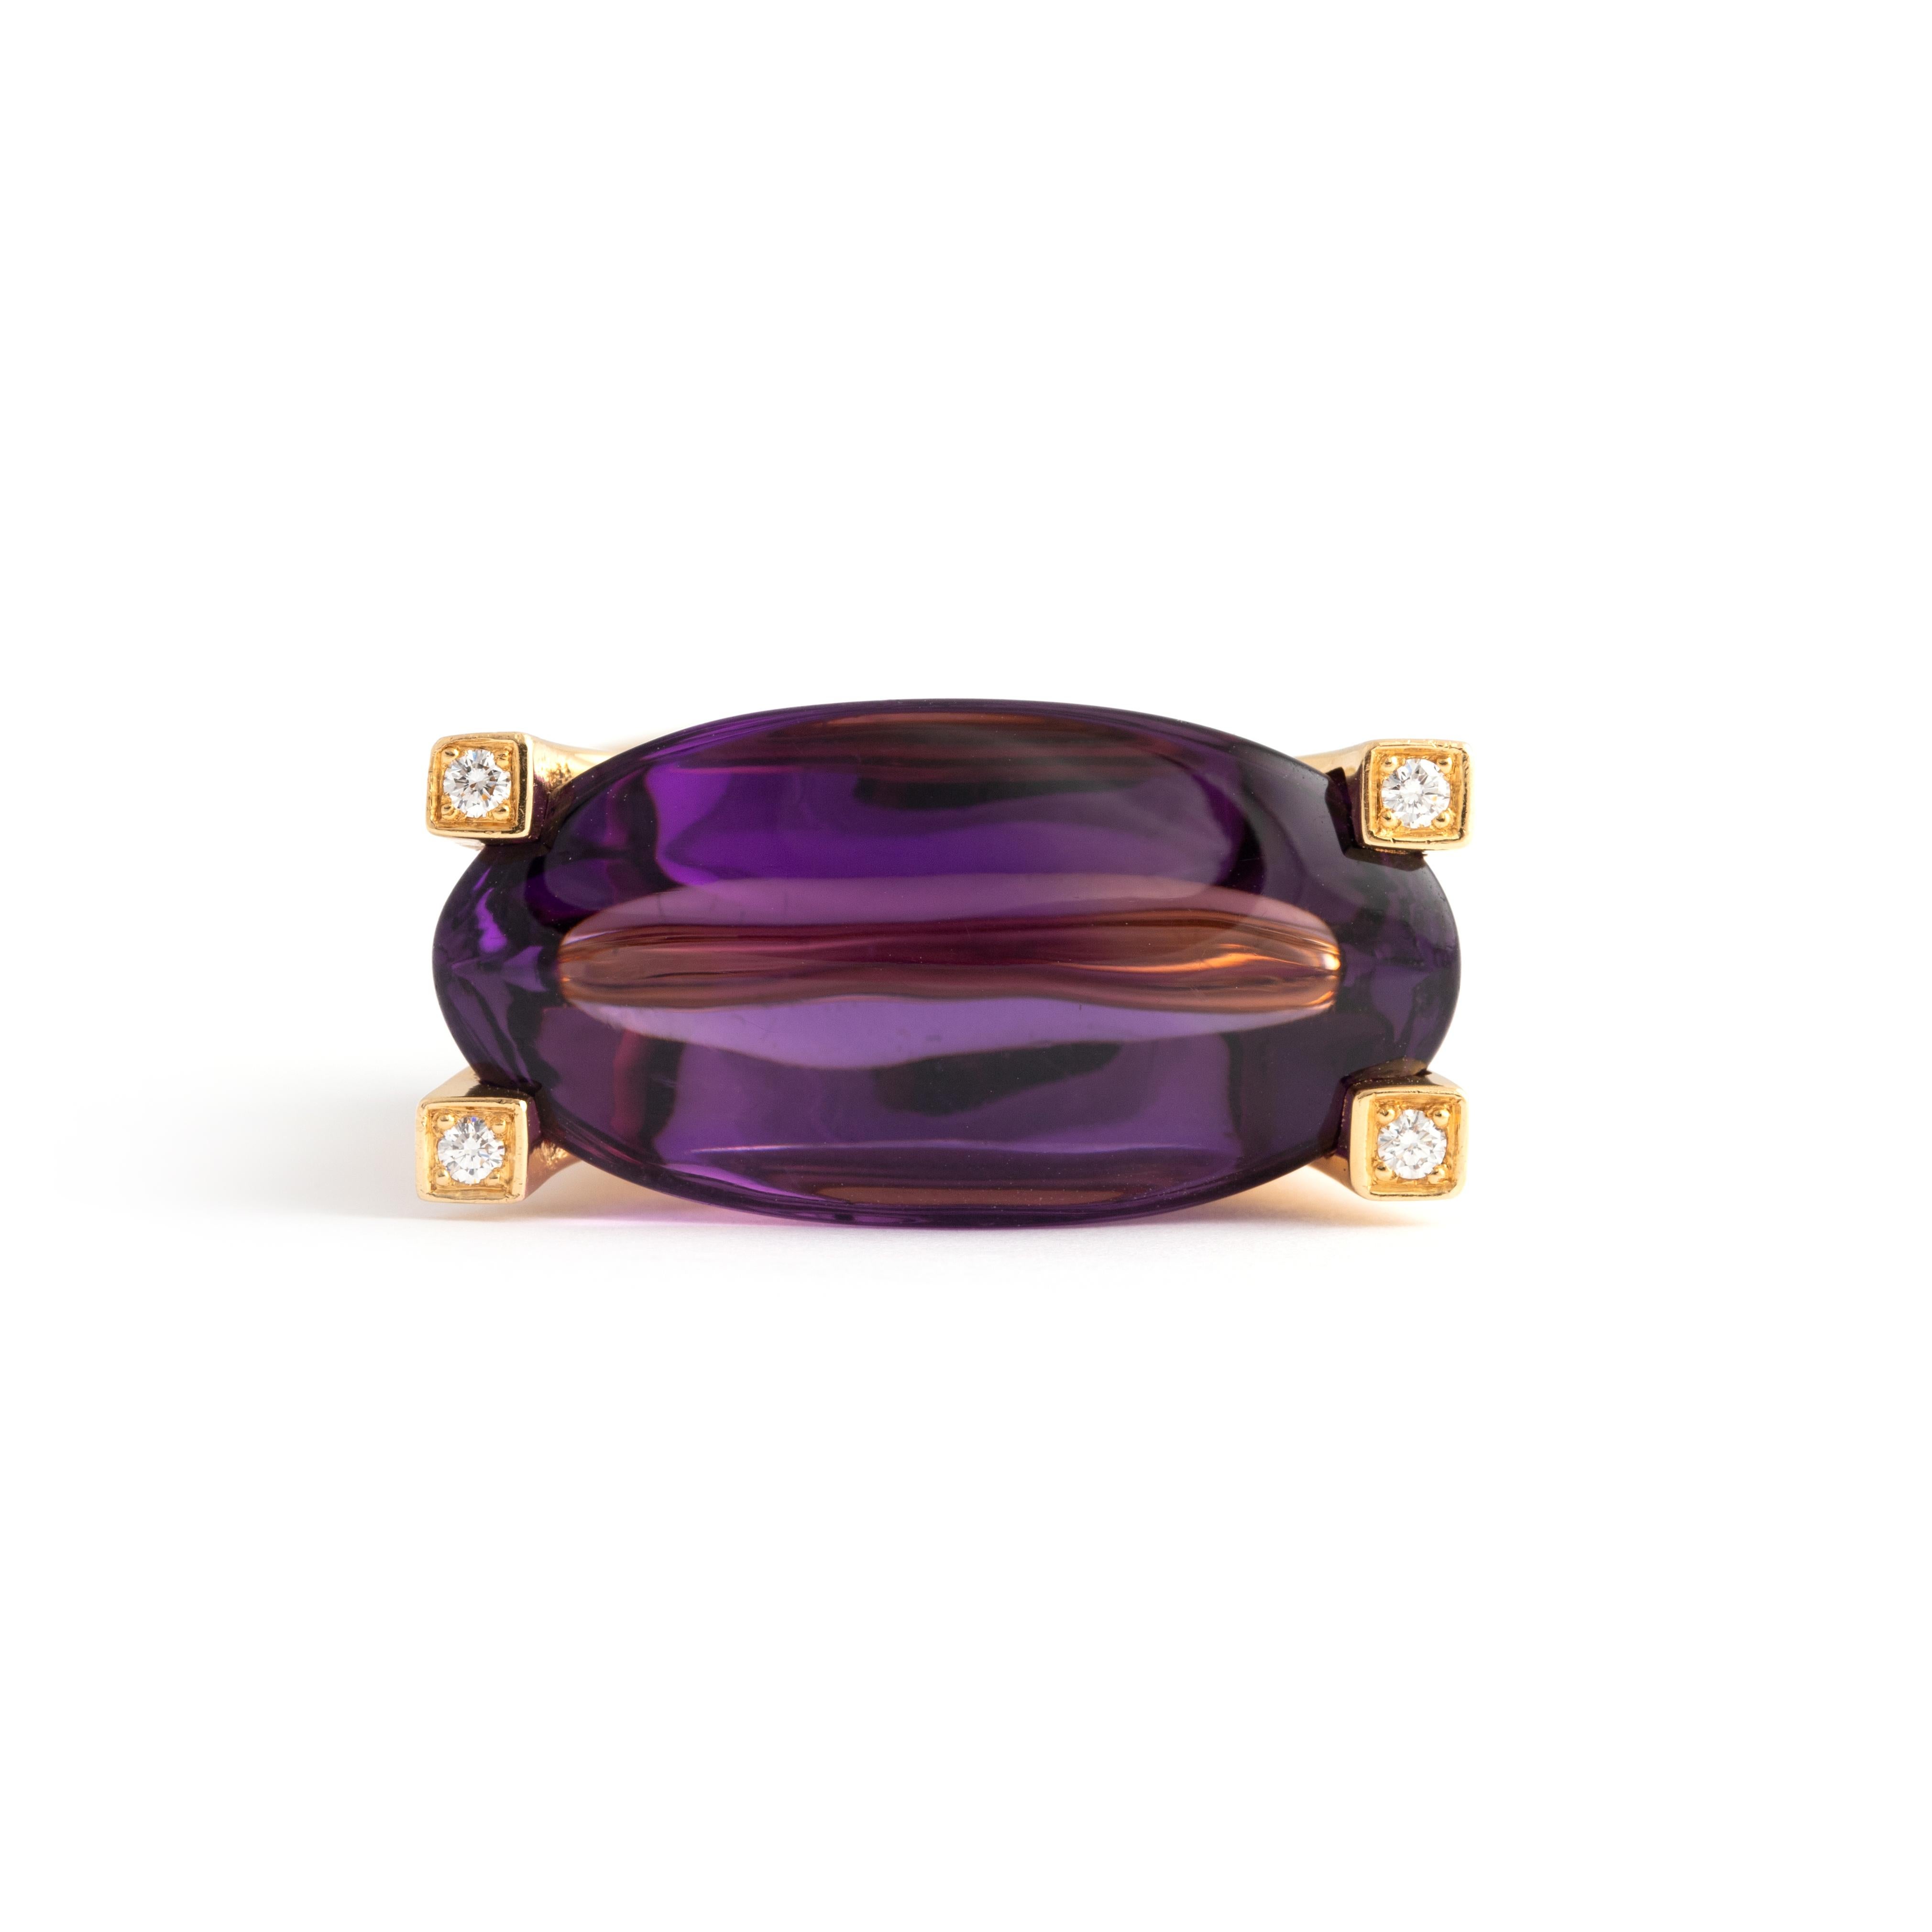 Van Cleef and Arpels important Amethyst Diamond Yellow Gold 18K Ring.

This Van Cleef & Arpels ring features a significant amethyst set in 18K yellow gold, accented with sparkling diamonds. Signed 